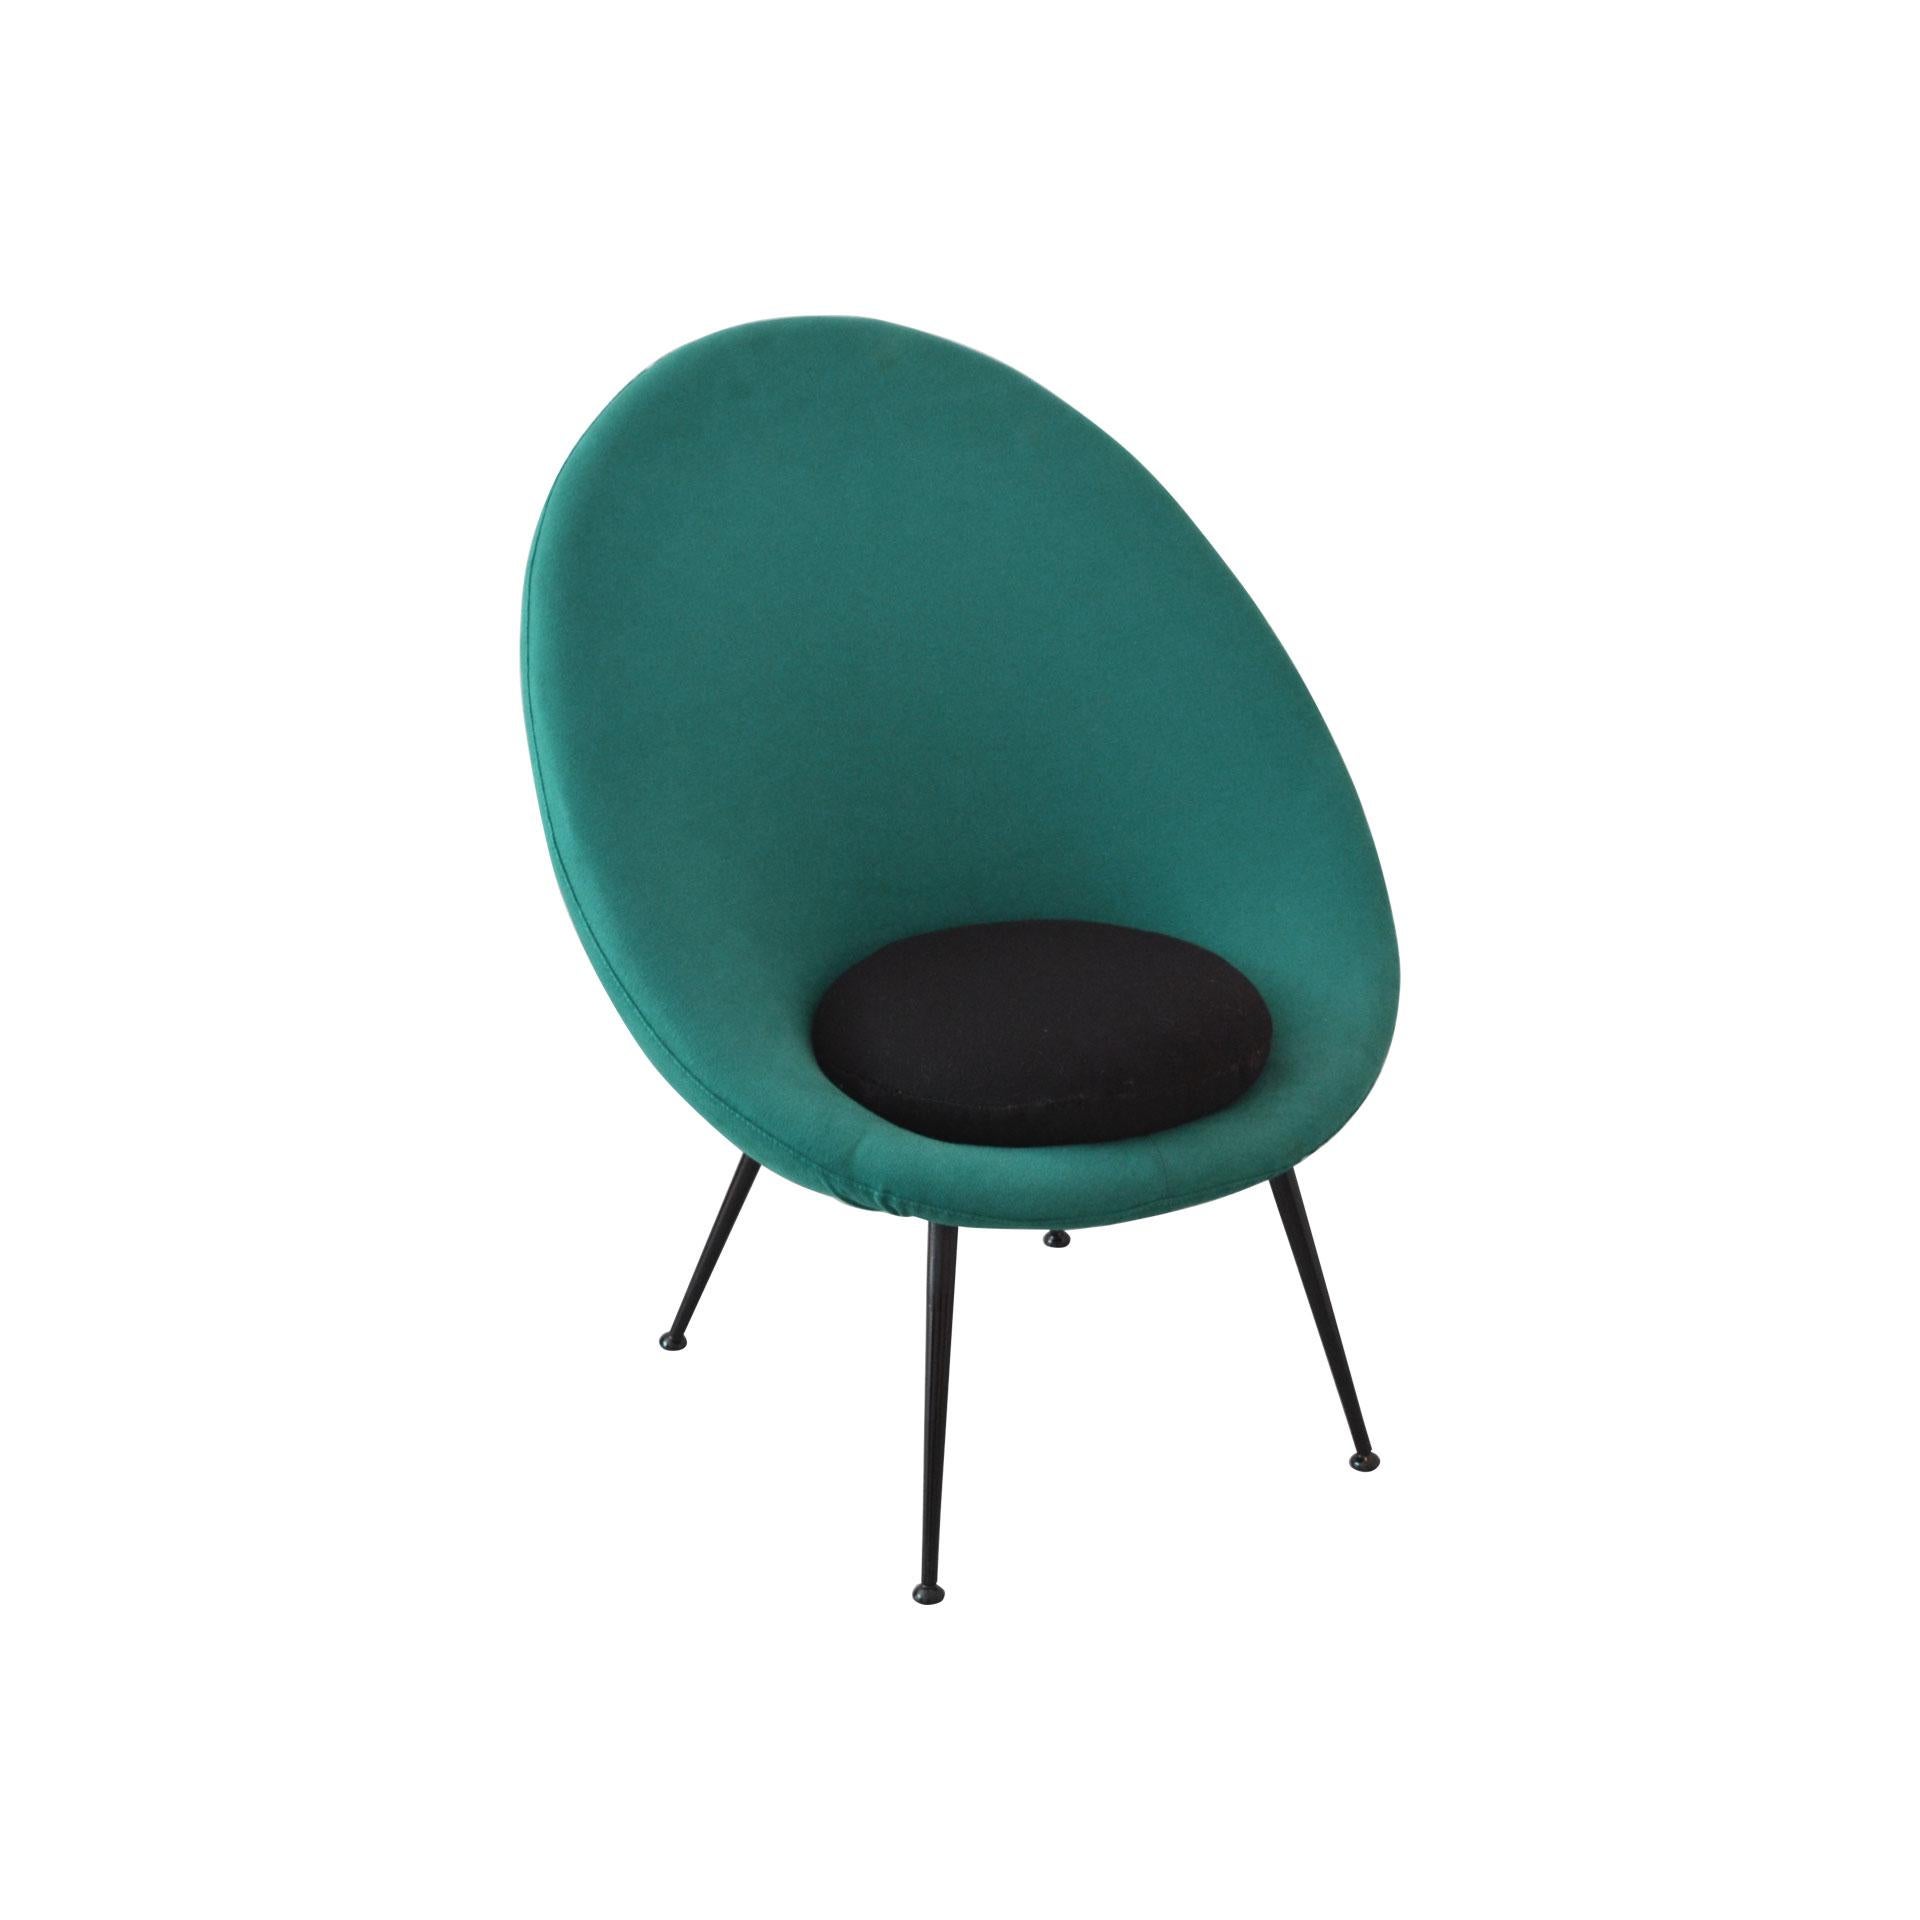 Armchair in the style of Ico Parisi with structure in painted metal and upholstery in green fabric with black cushion of the 1960s. Good condition.